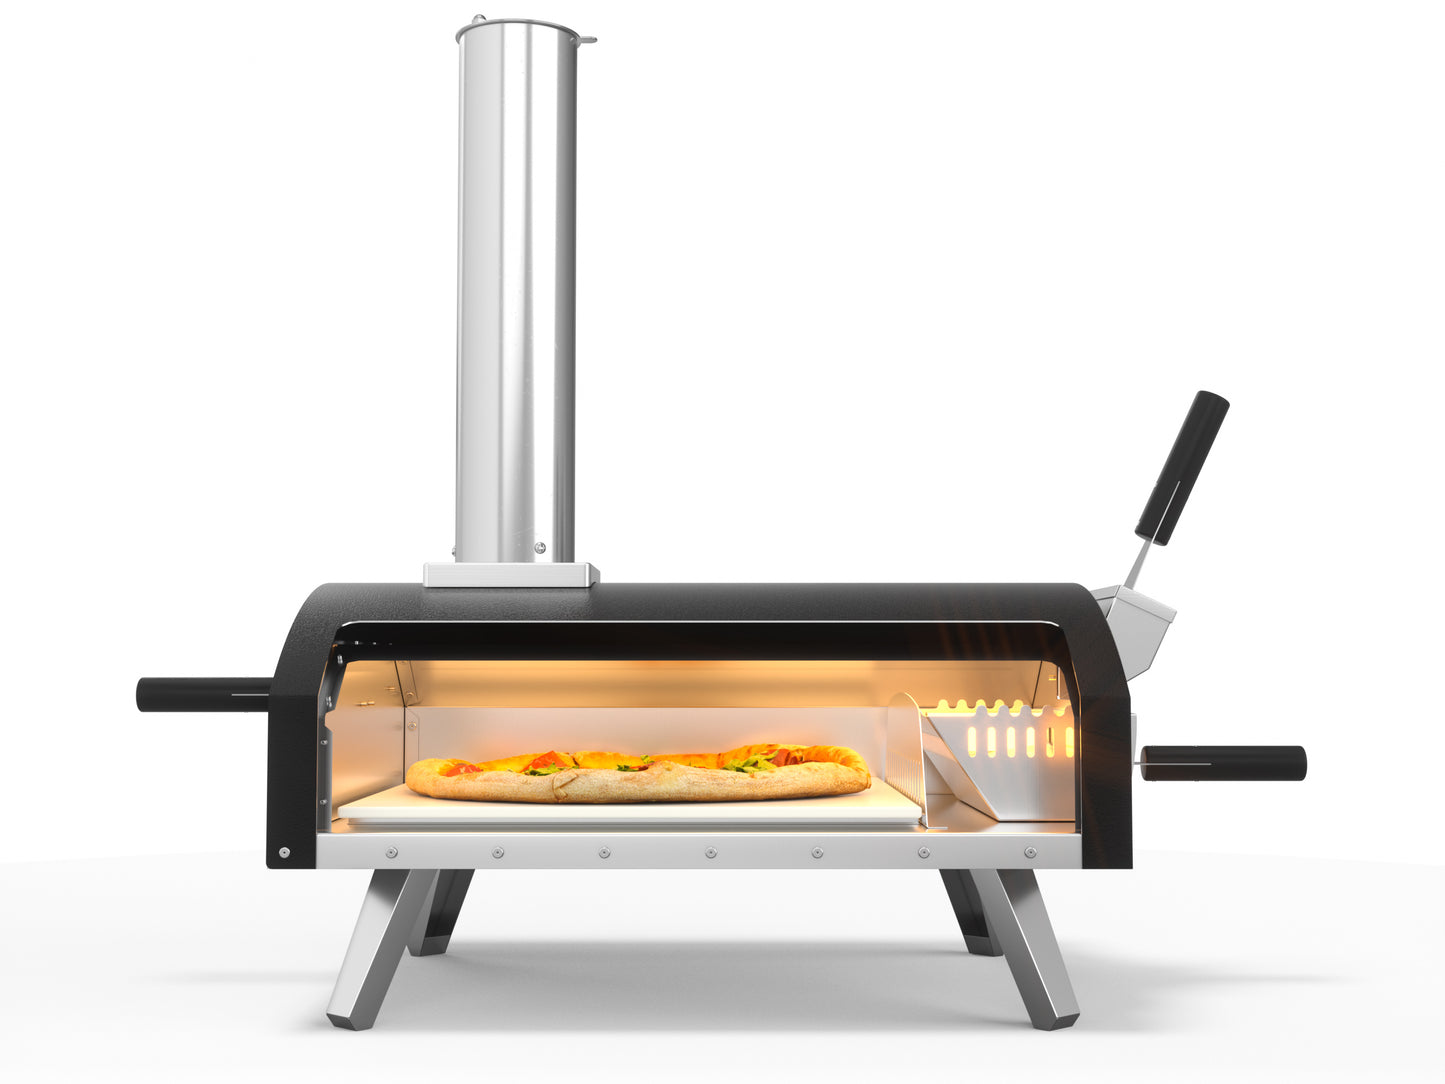 THE STOKE PIZZA OVEN